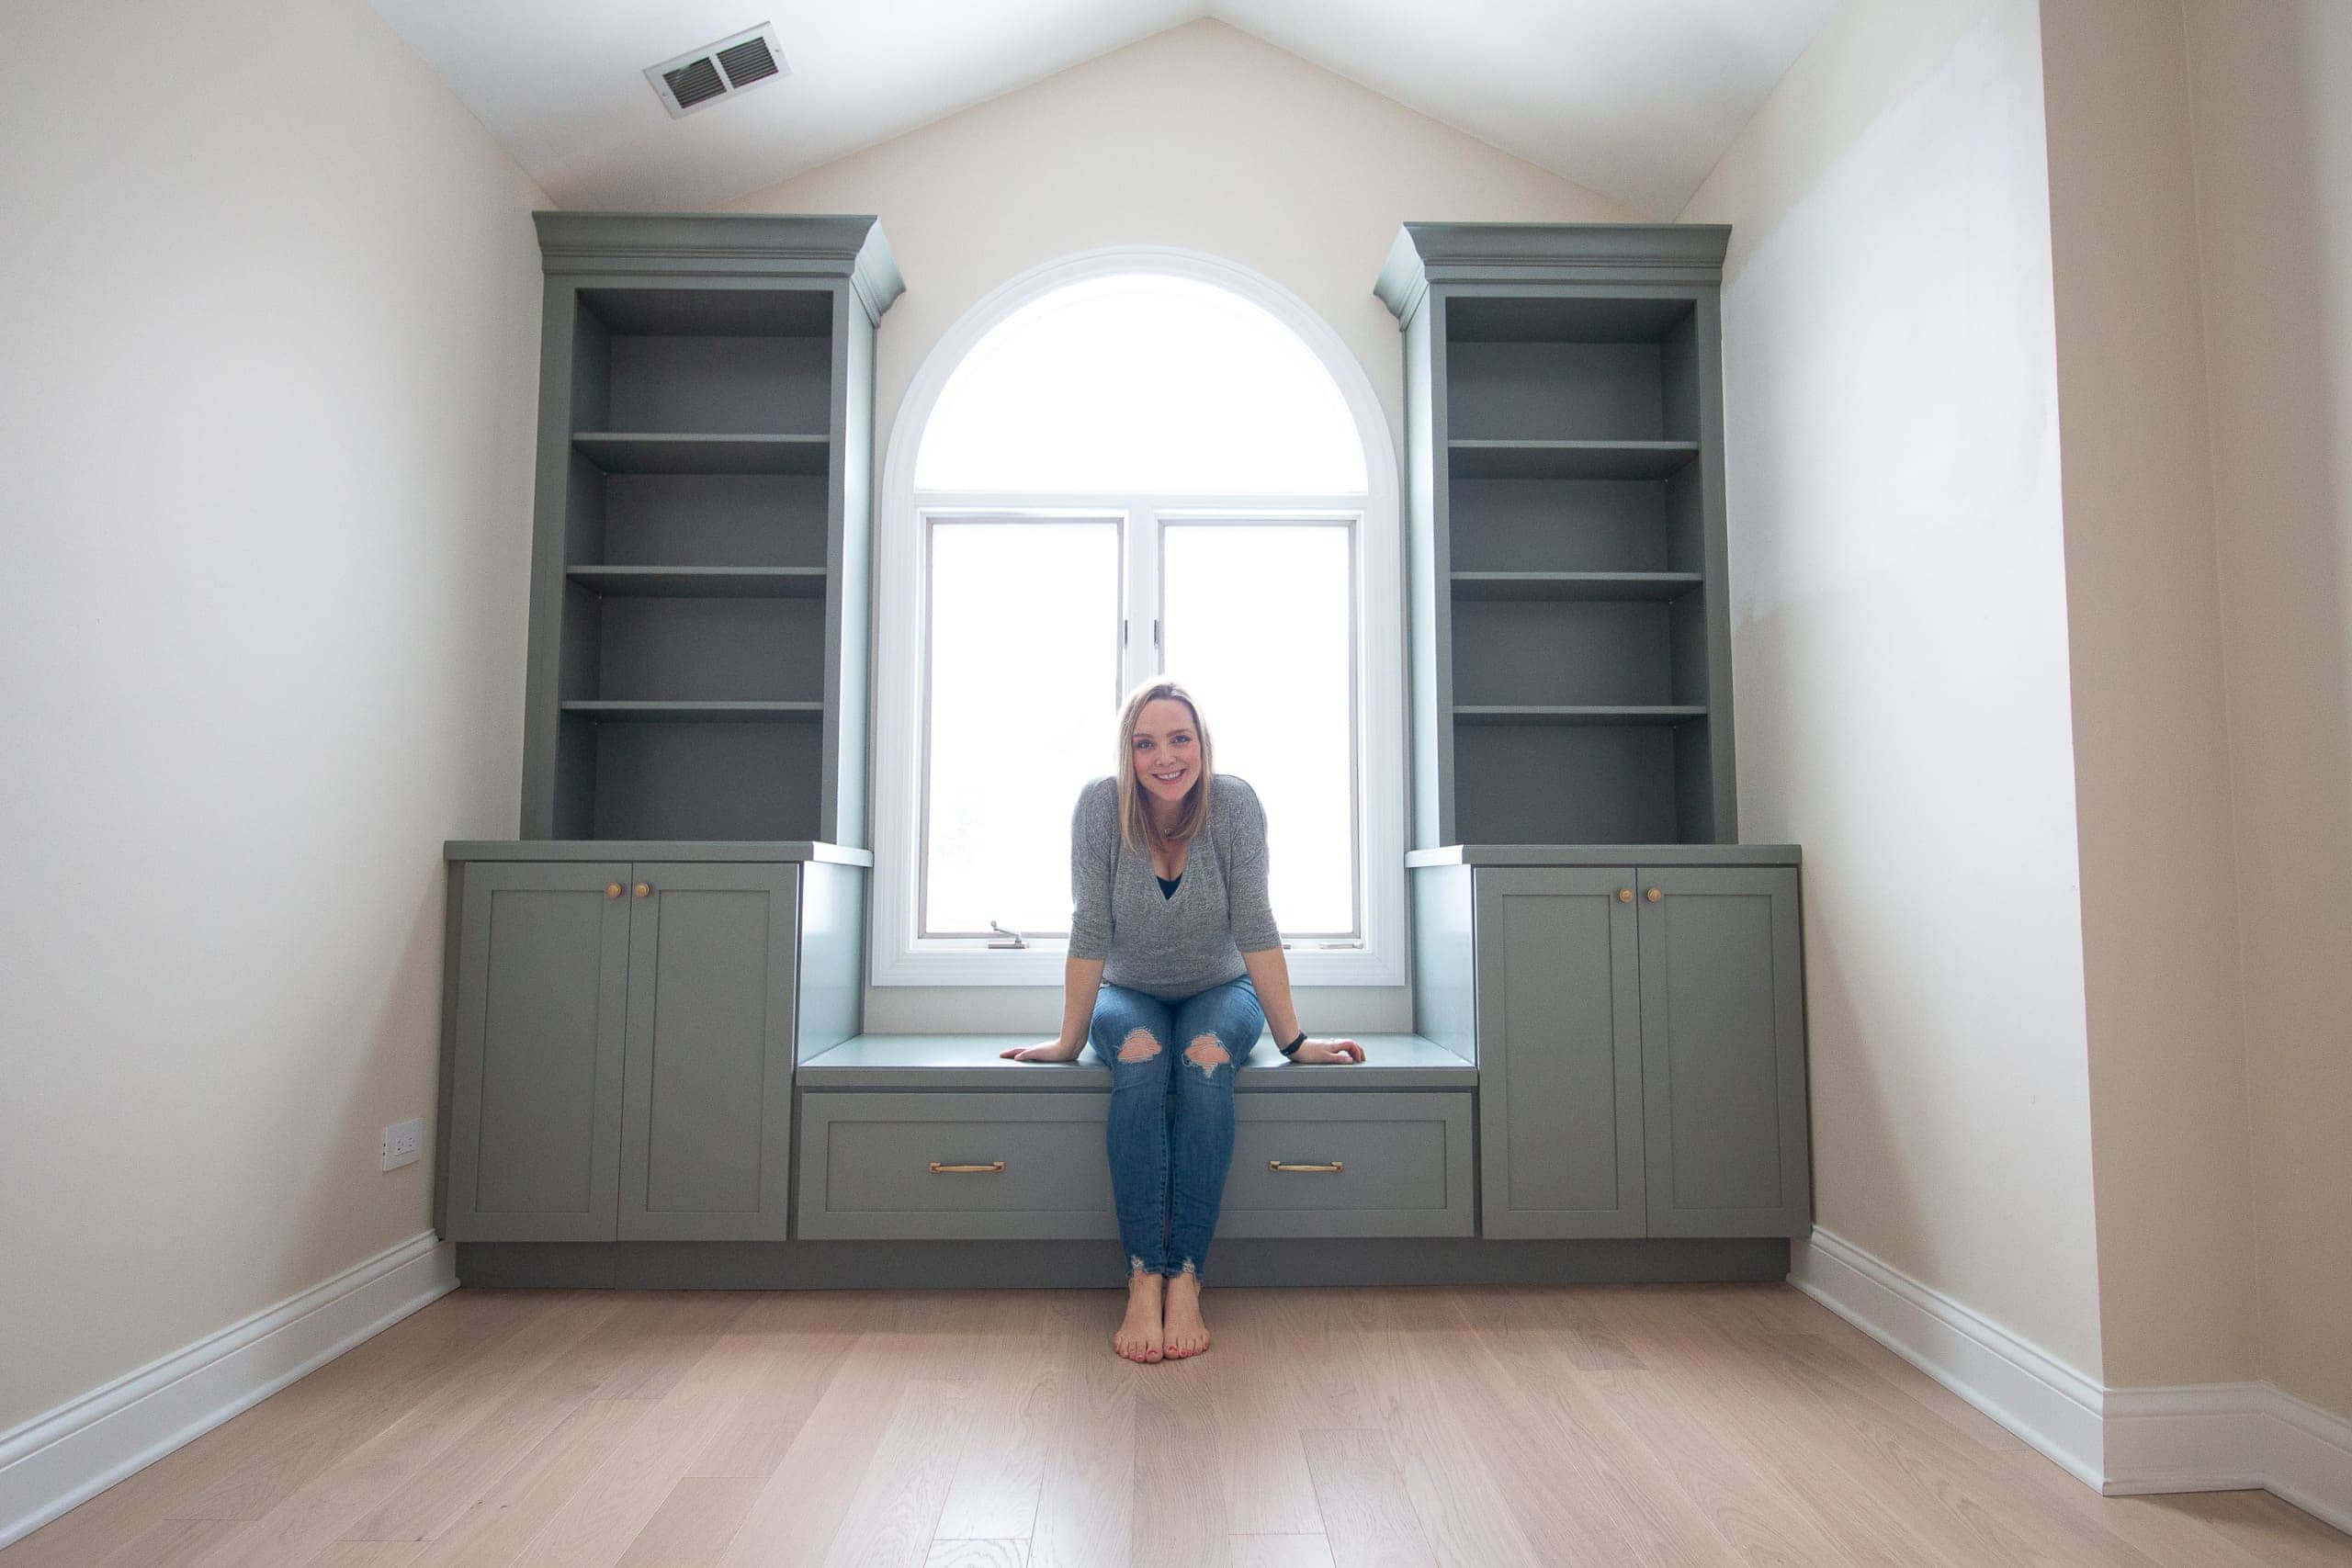 Designing and installing custom nursery built-ins in the color sage green